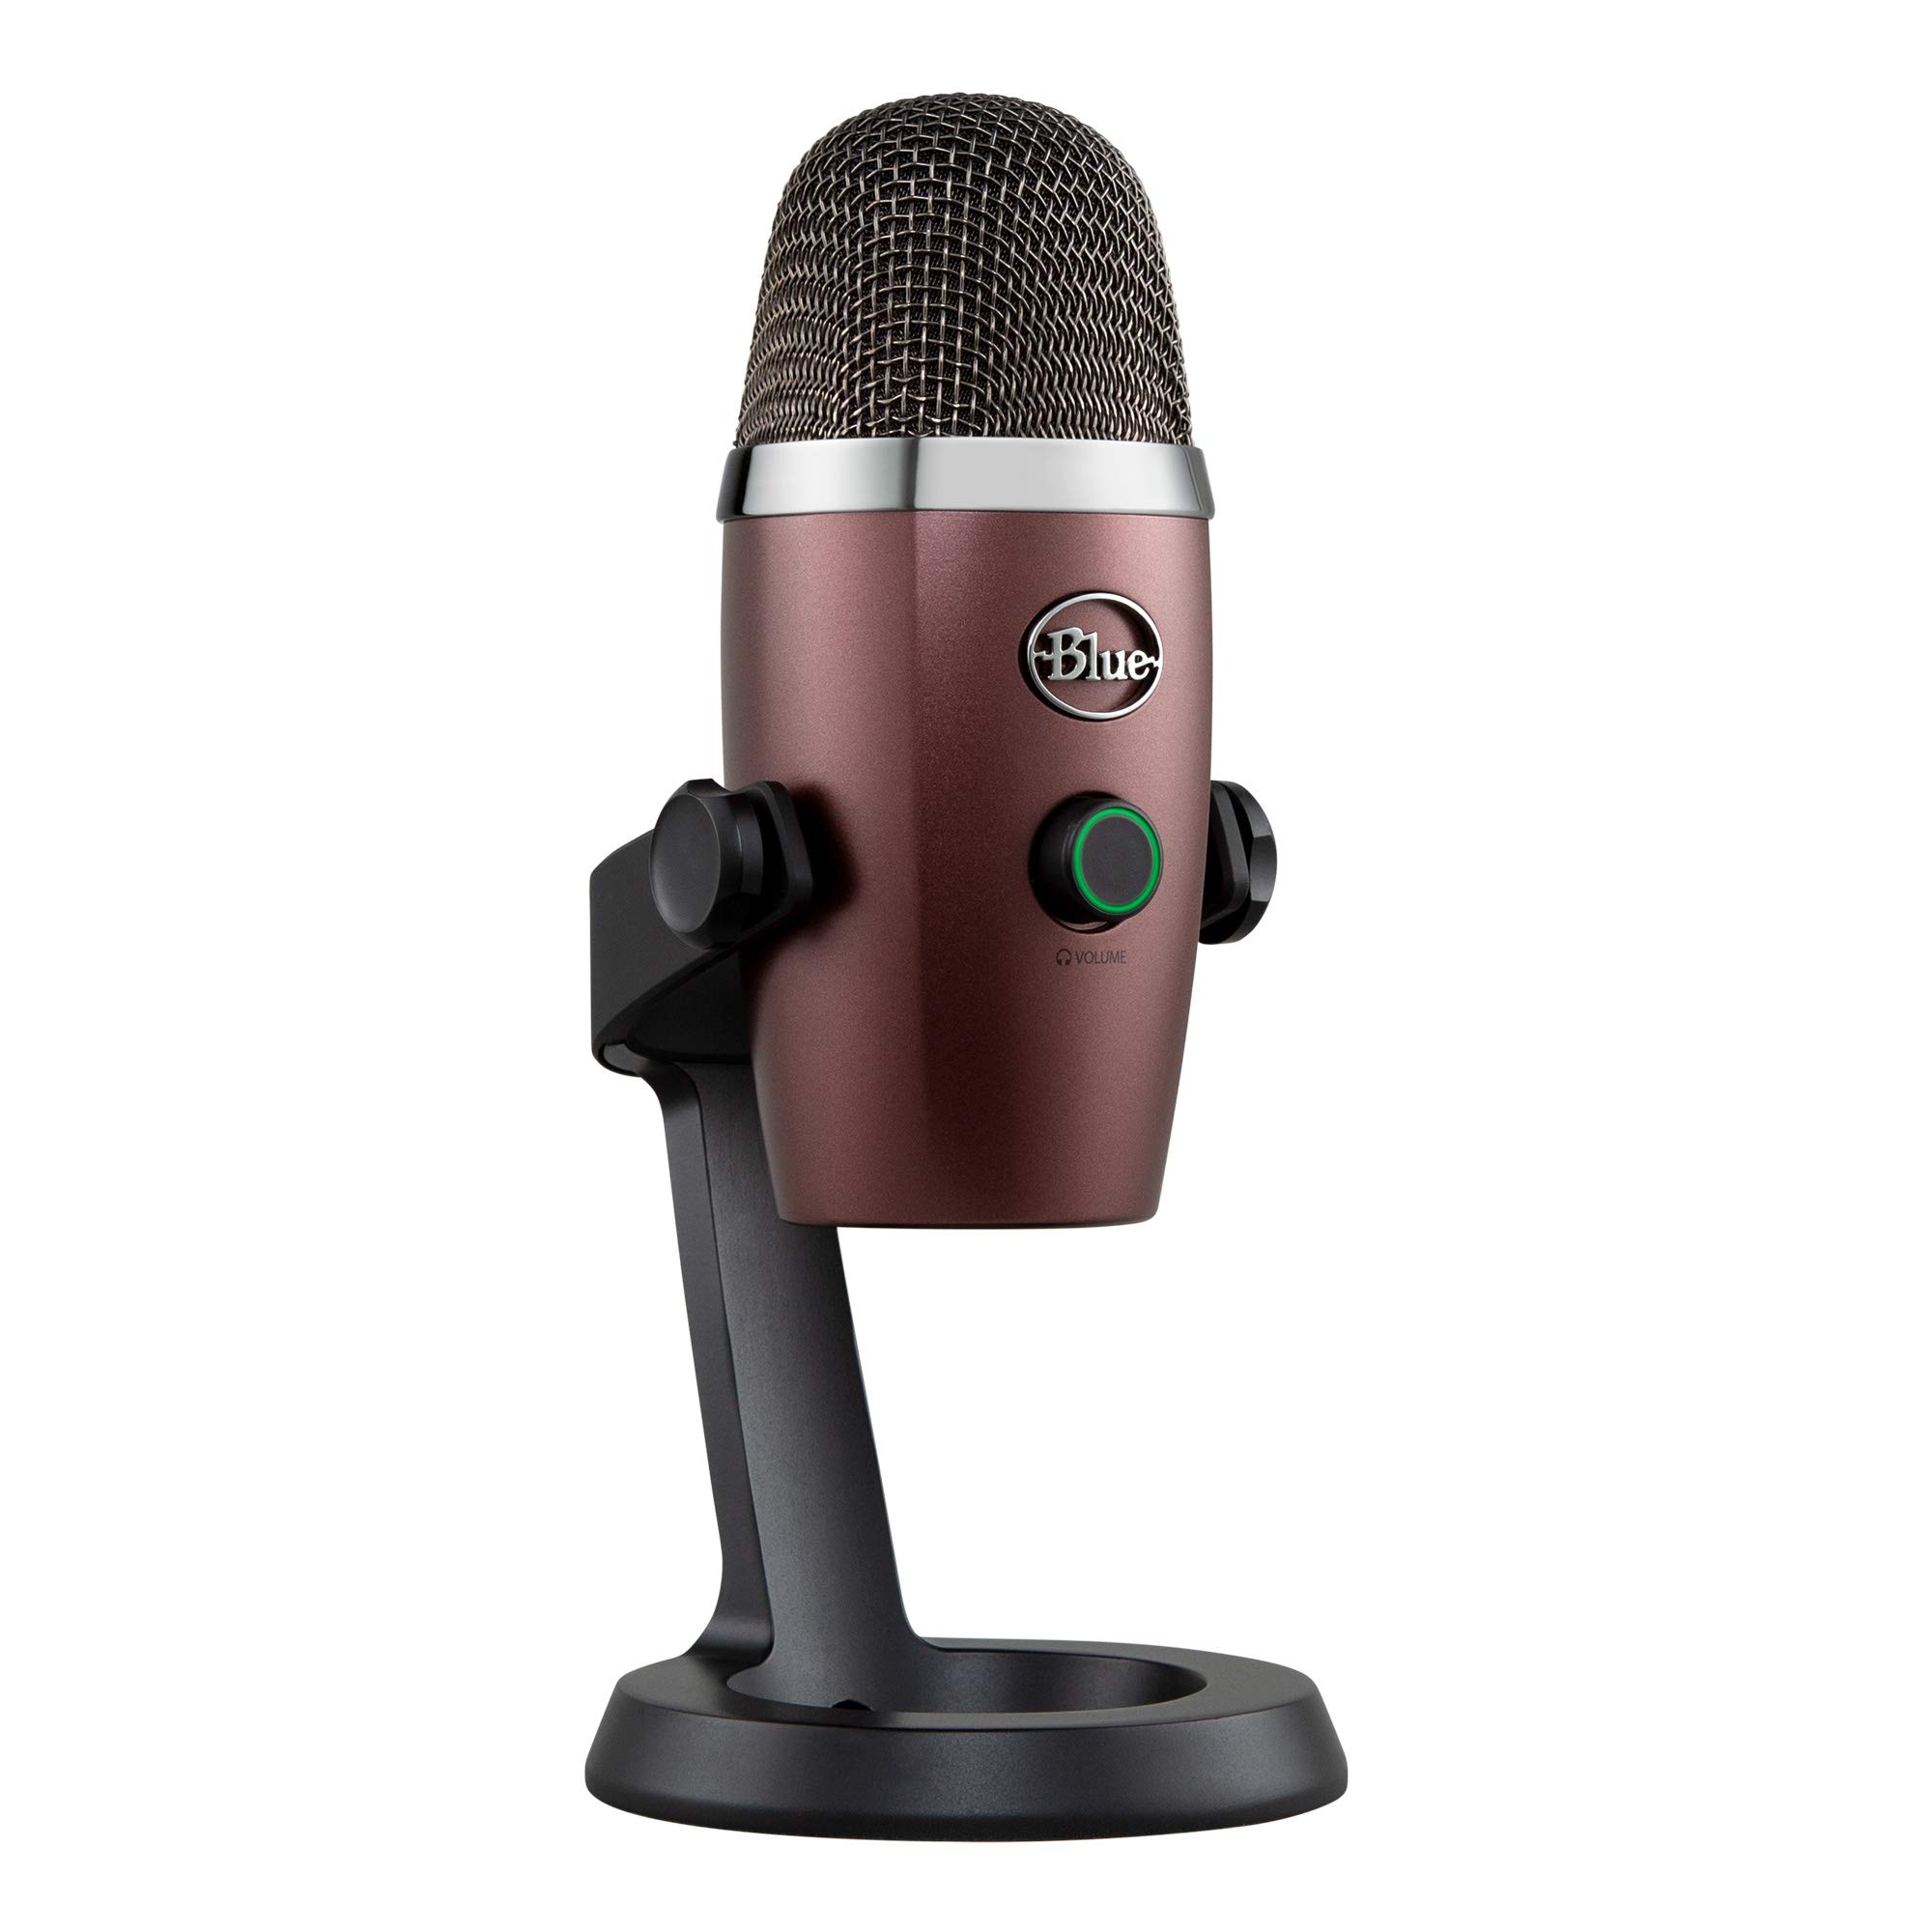  Logitech for Creators Yeti Nano Premium USB Microphone for Recording, Streaming, Gaming, Podcasting on PC and Mac, Condenser Mic with  VO!CE Effects, Cardioid and Omni, No-Latency Monitoring - Red Onyx...